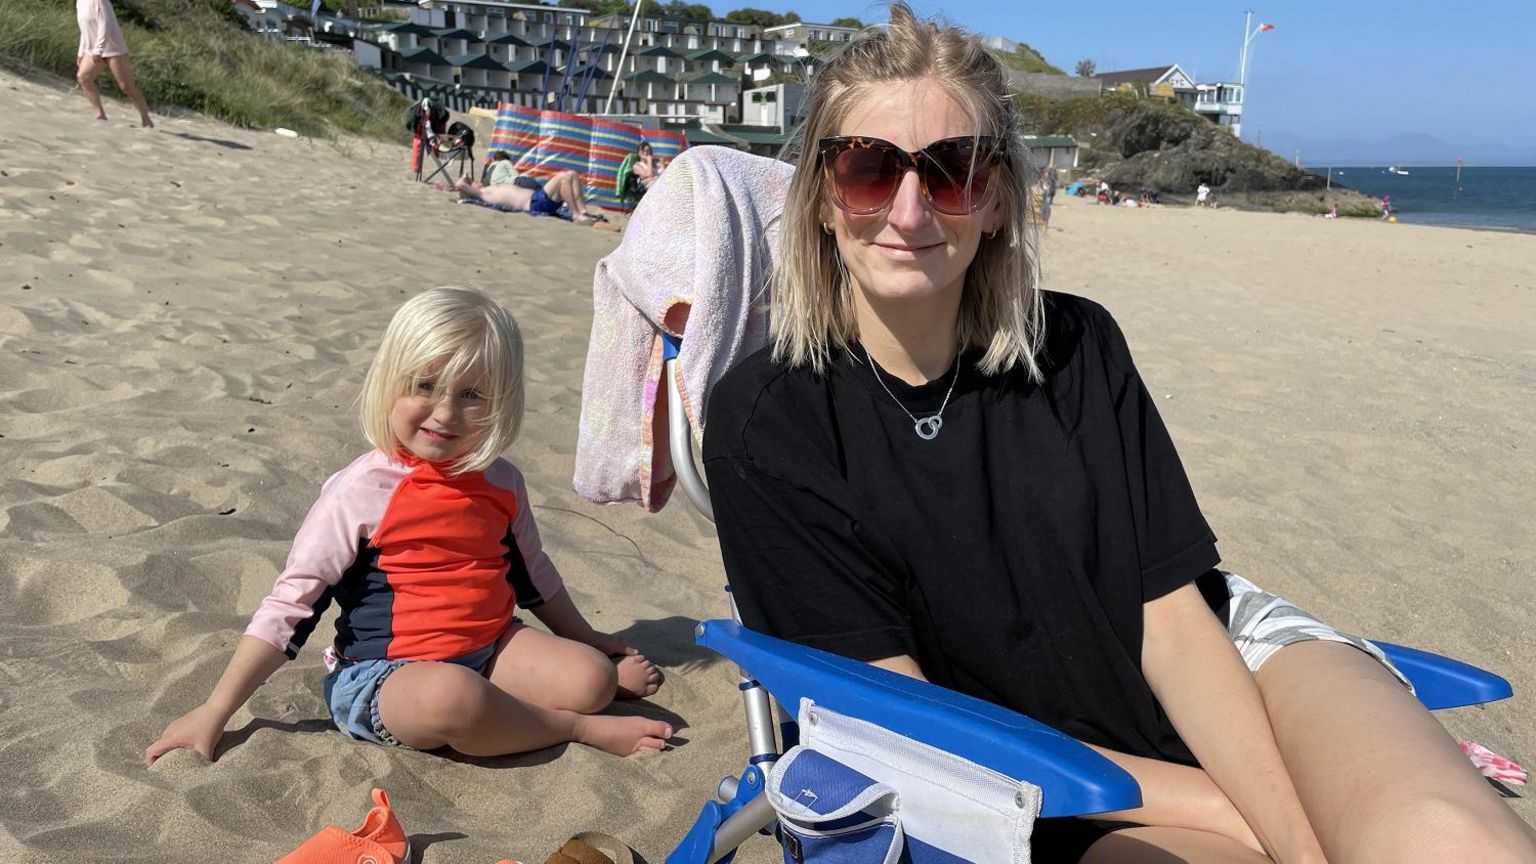 Grace Earnshaw sat in a camping chair on the beach at Abersoch, wearing sunglasses, with her young daughter sat beside her on the sand